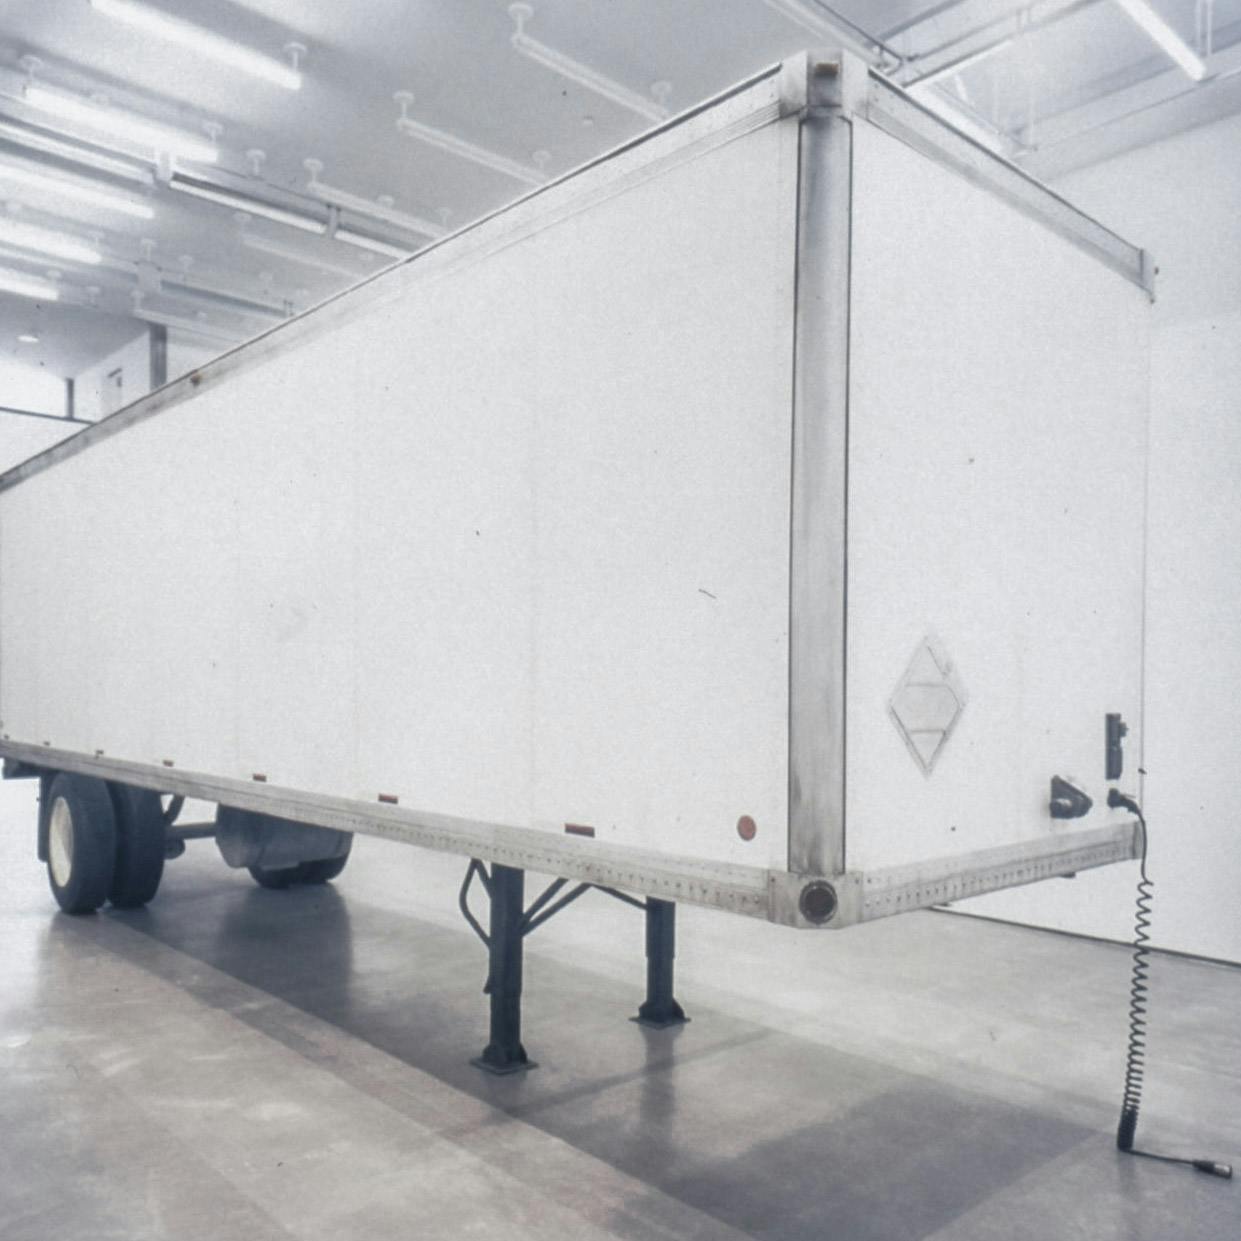 This is a side view of a white semi truck trailer installed in a gallery space. Two beams support the structure where the trailer attaches to a truck.